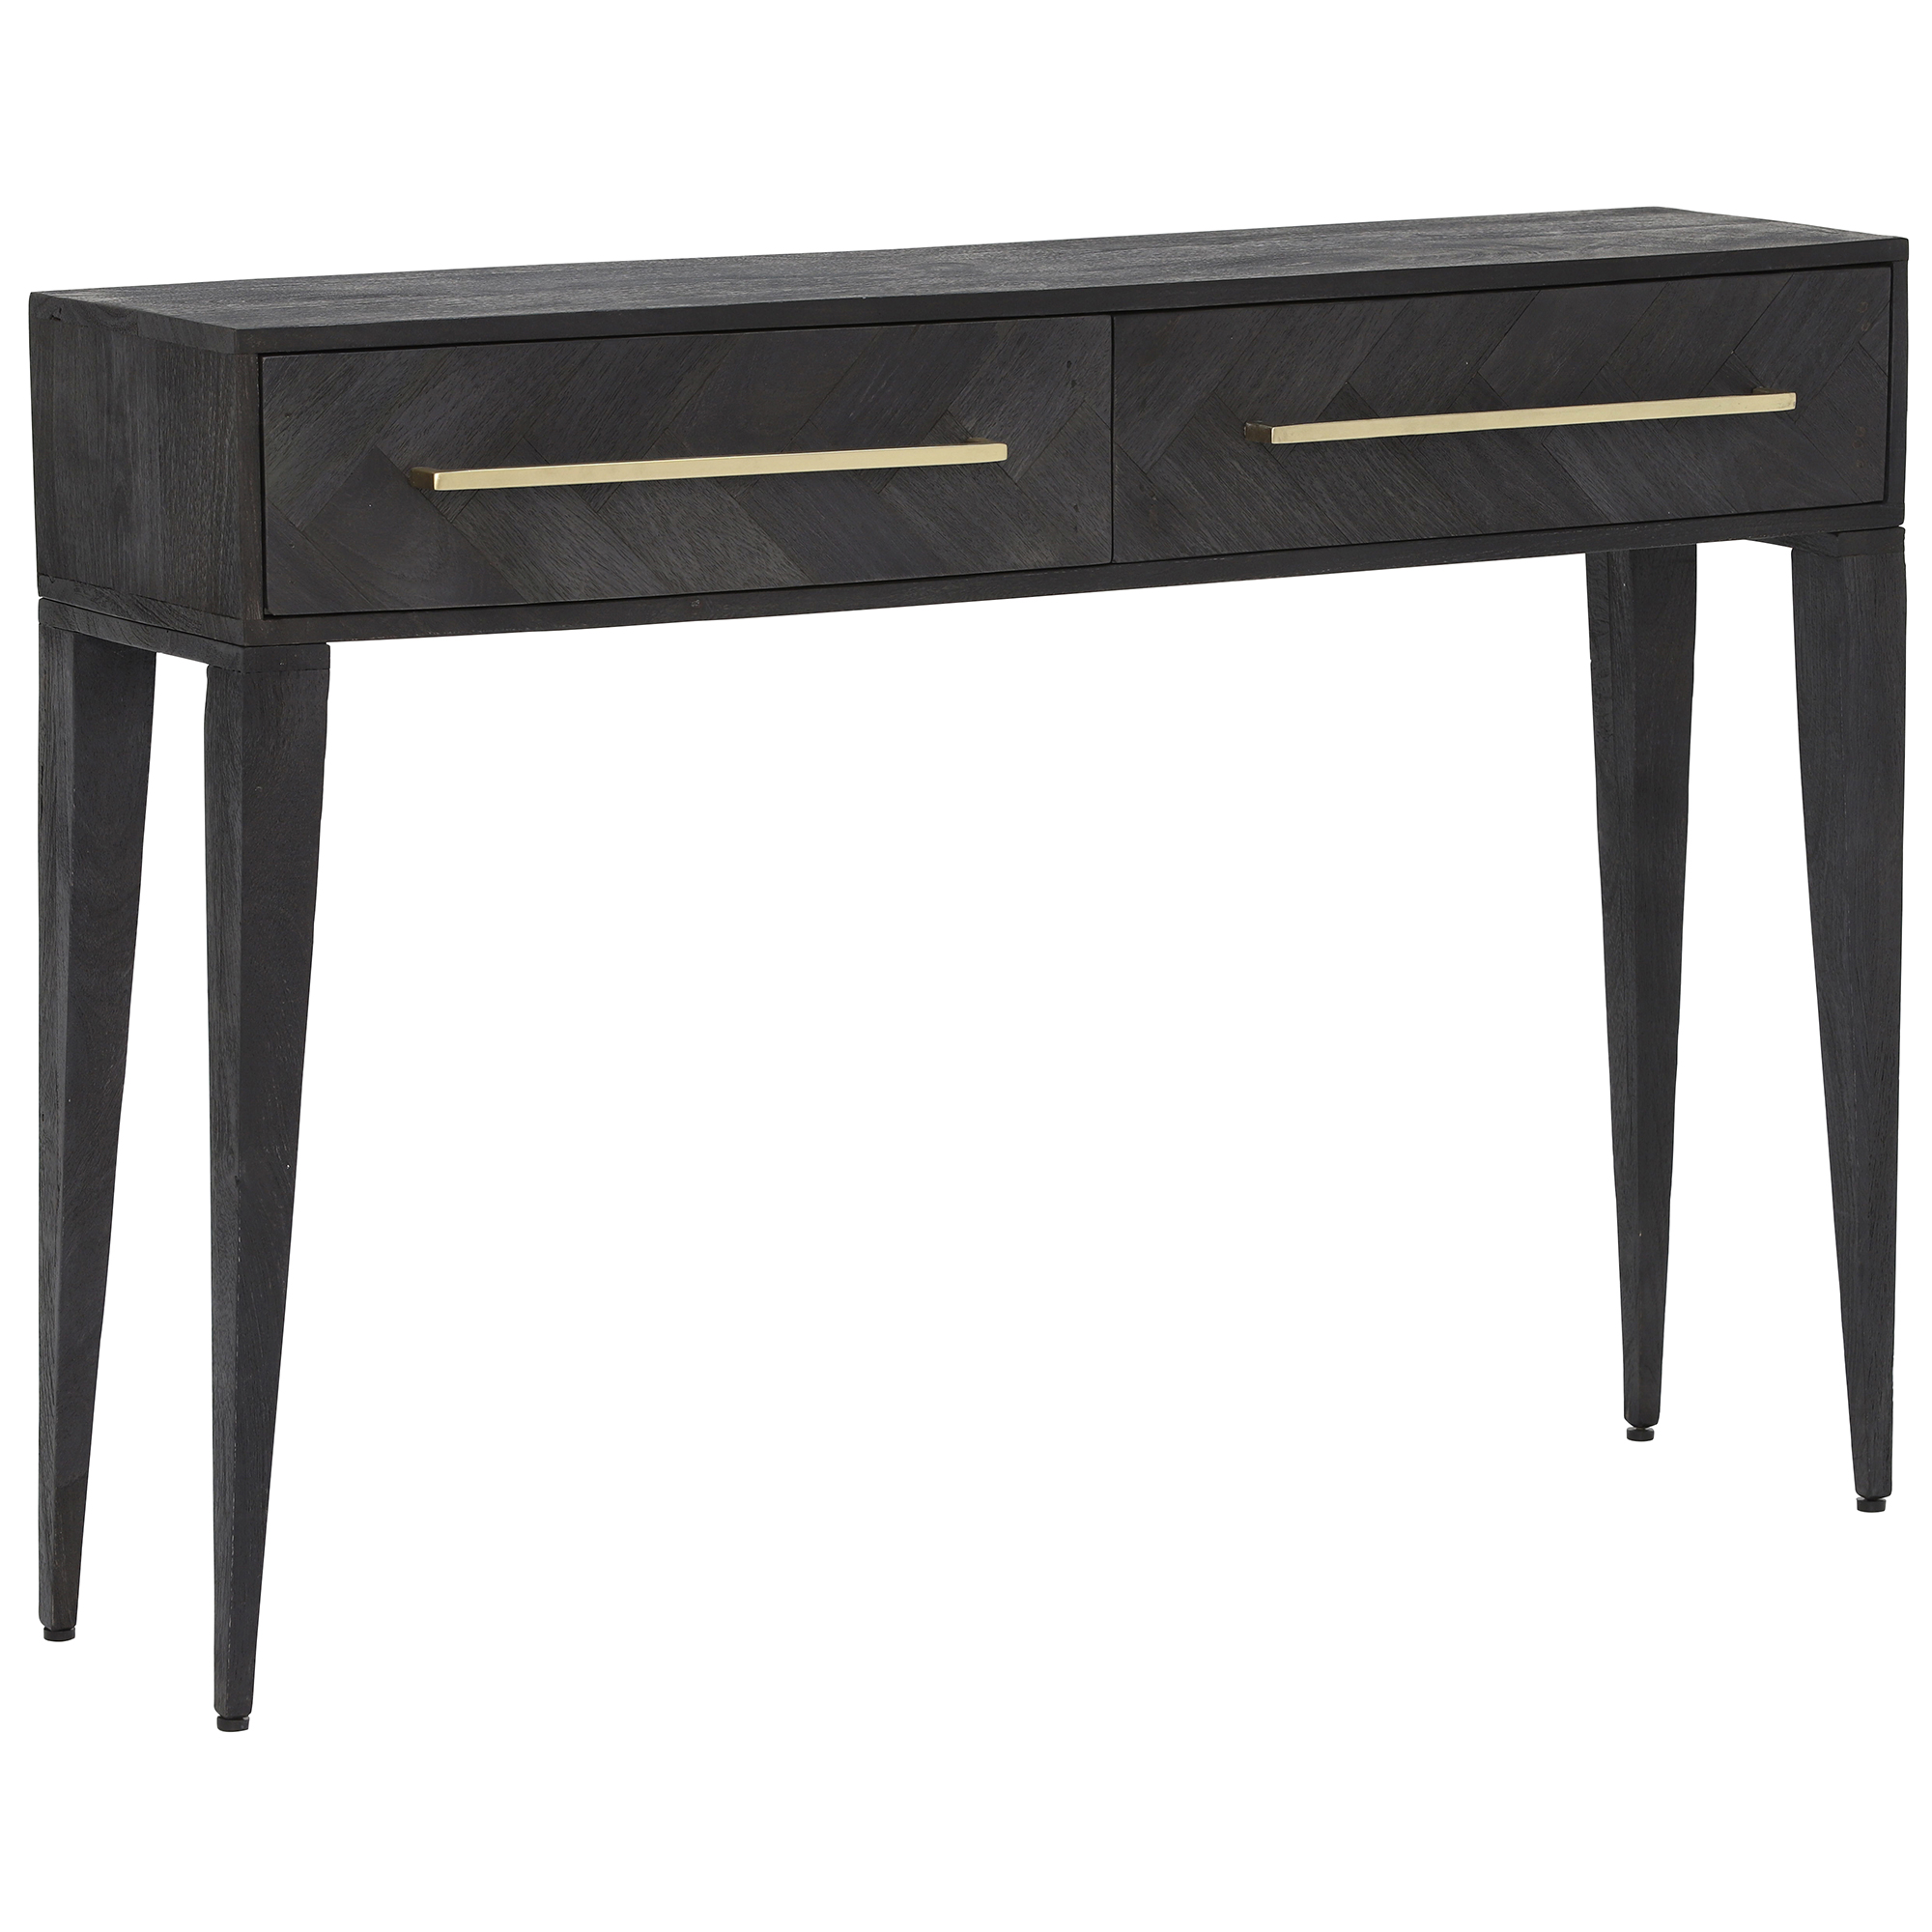 Onyx Console Table, Black | Barker & Stonehouse